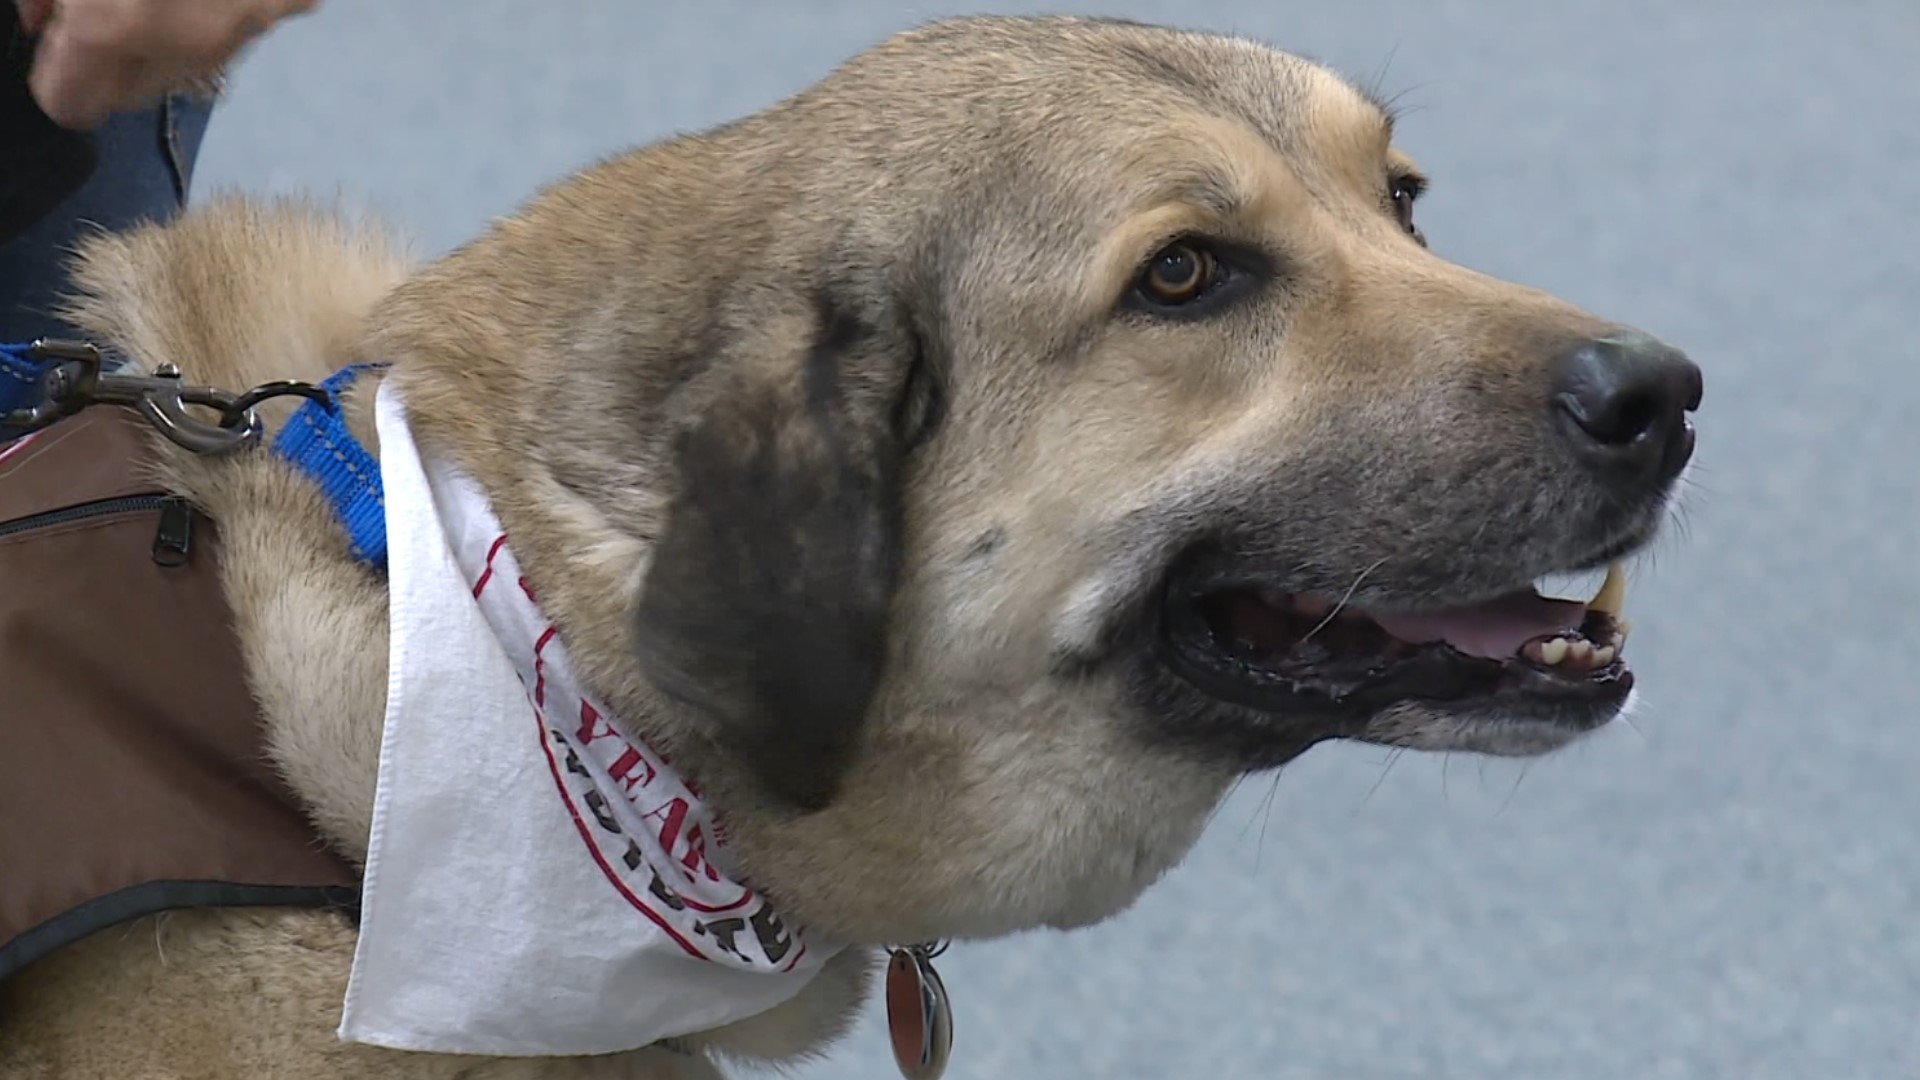 An event in Rogers is raising money for a therapy dog. The "Let's Paws for Love" event was held on Saturday, March 4.